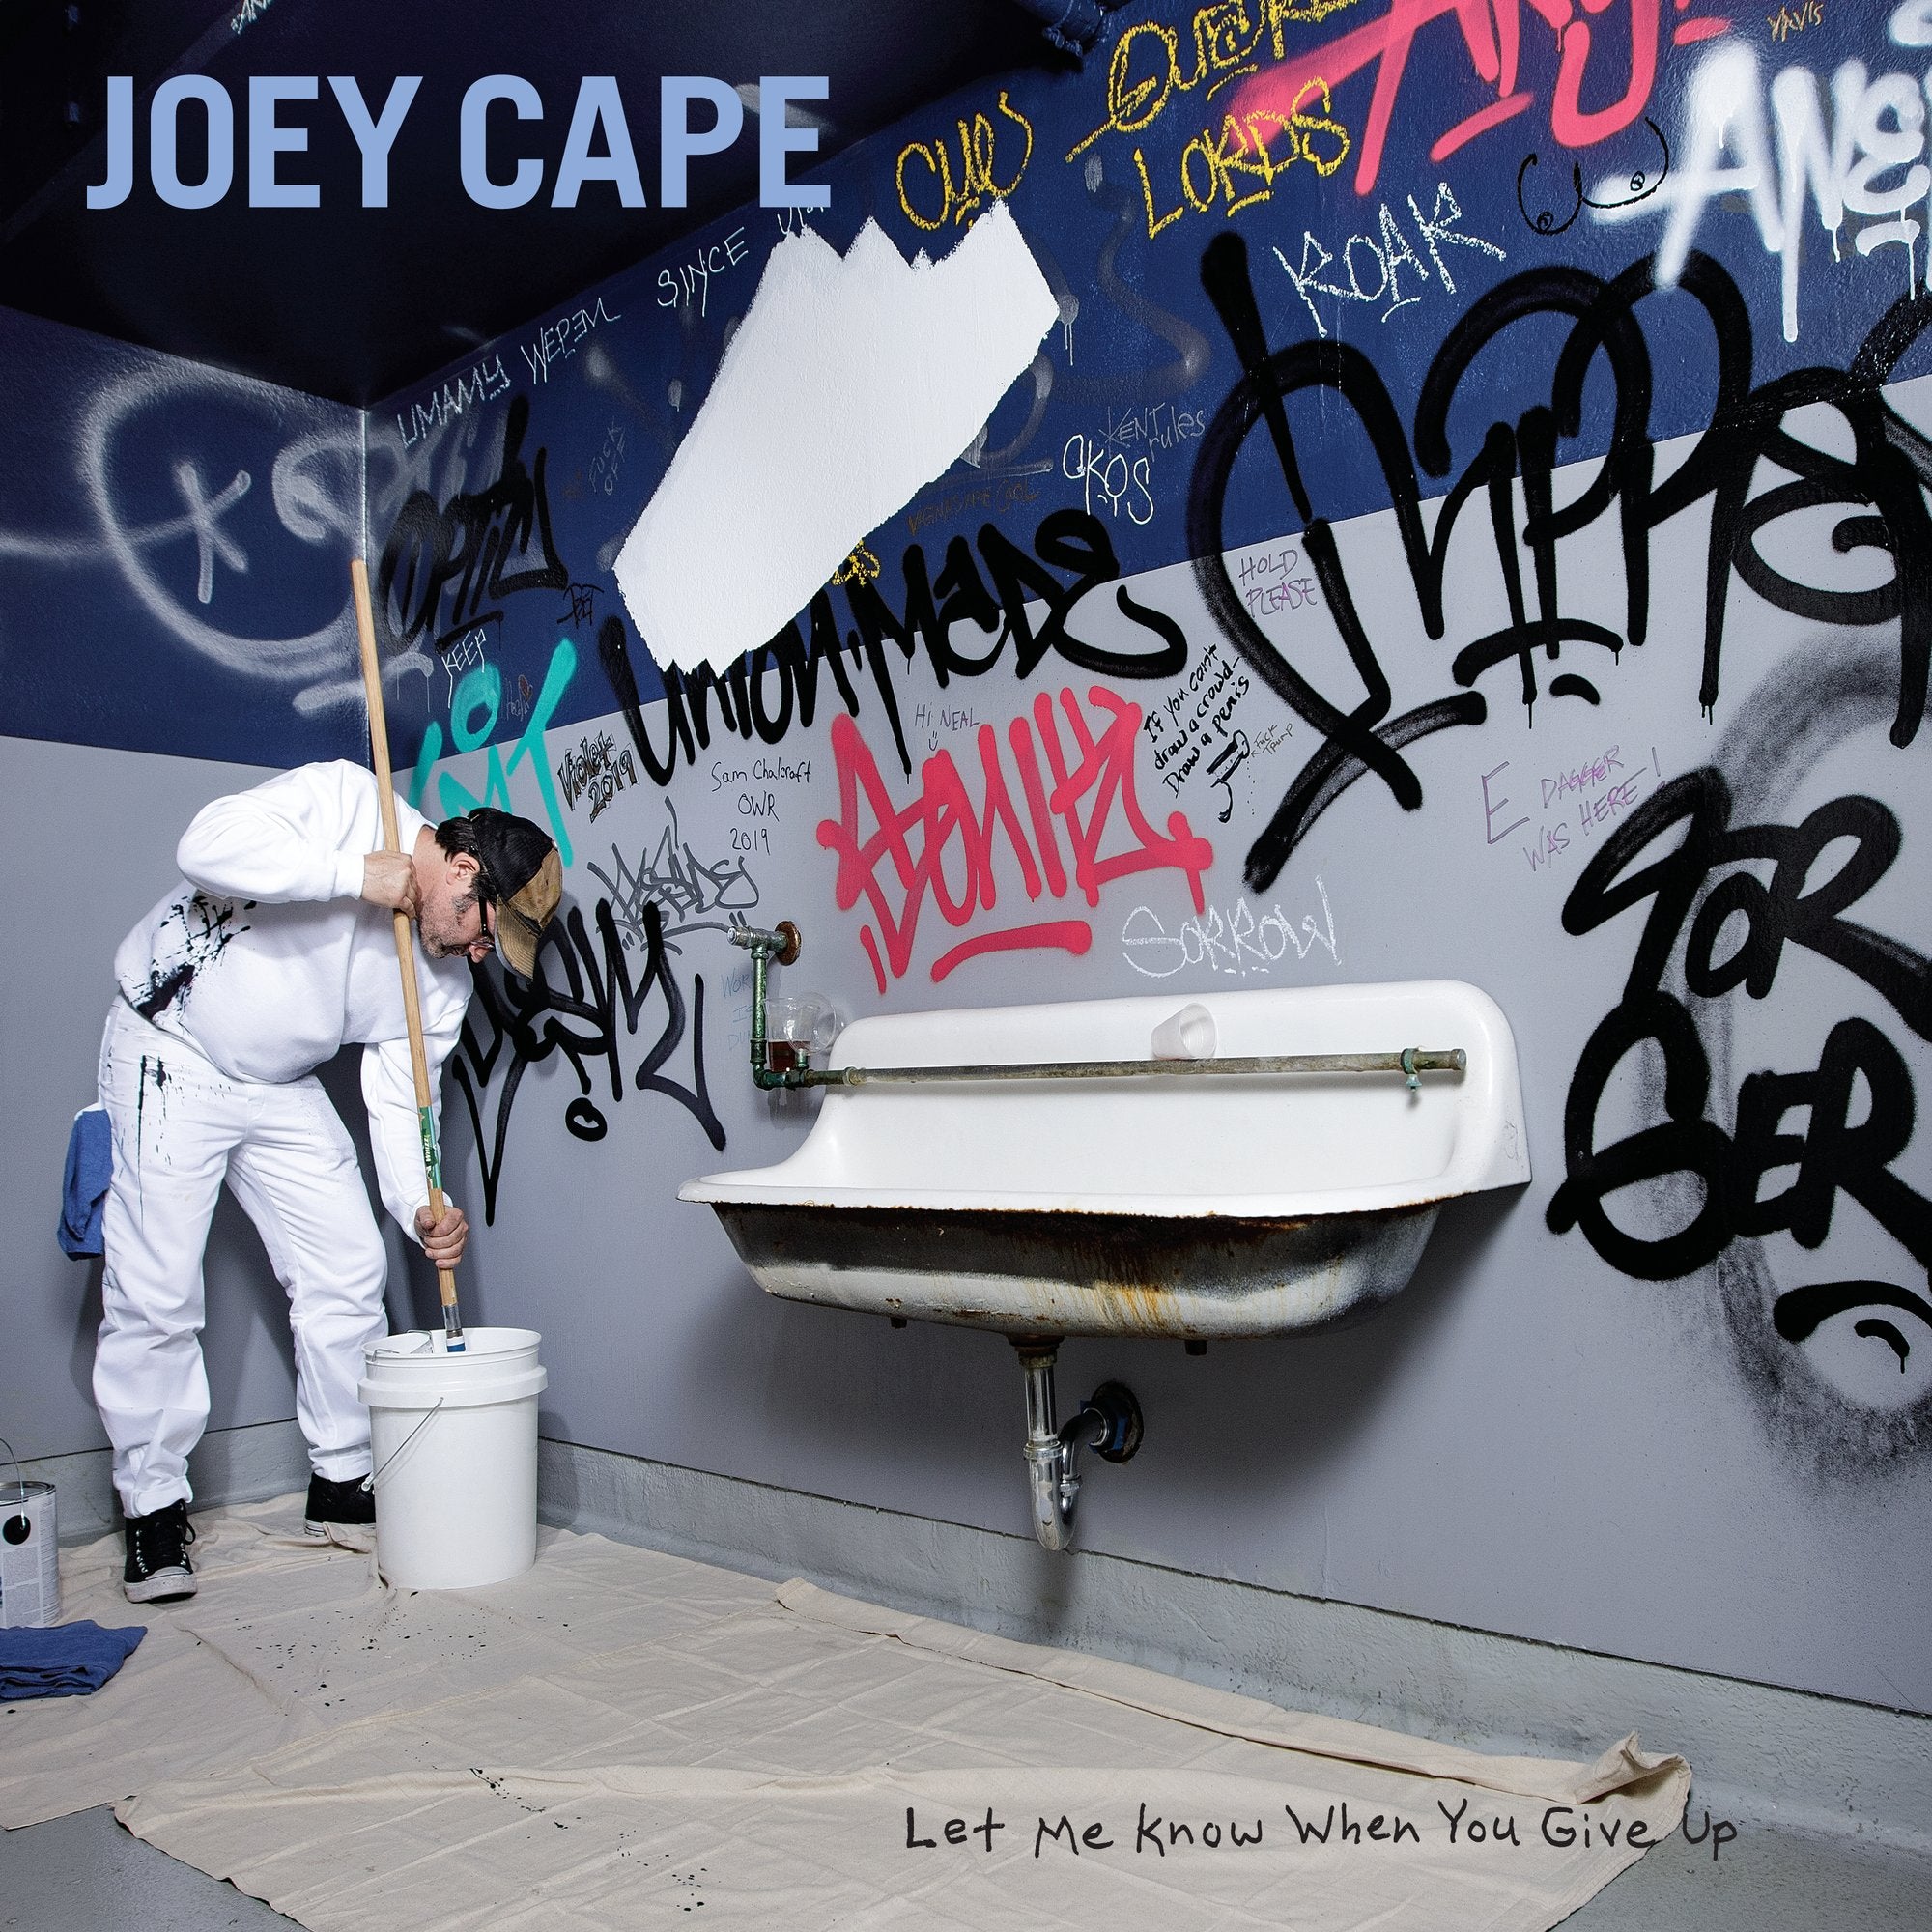 Joey Cape - Let Me Know When You Give Up (Vinyl LP Record)